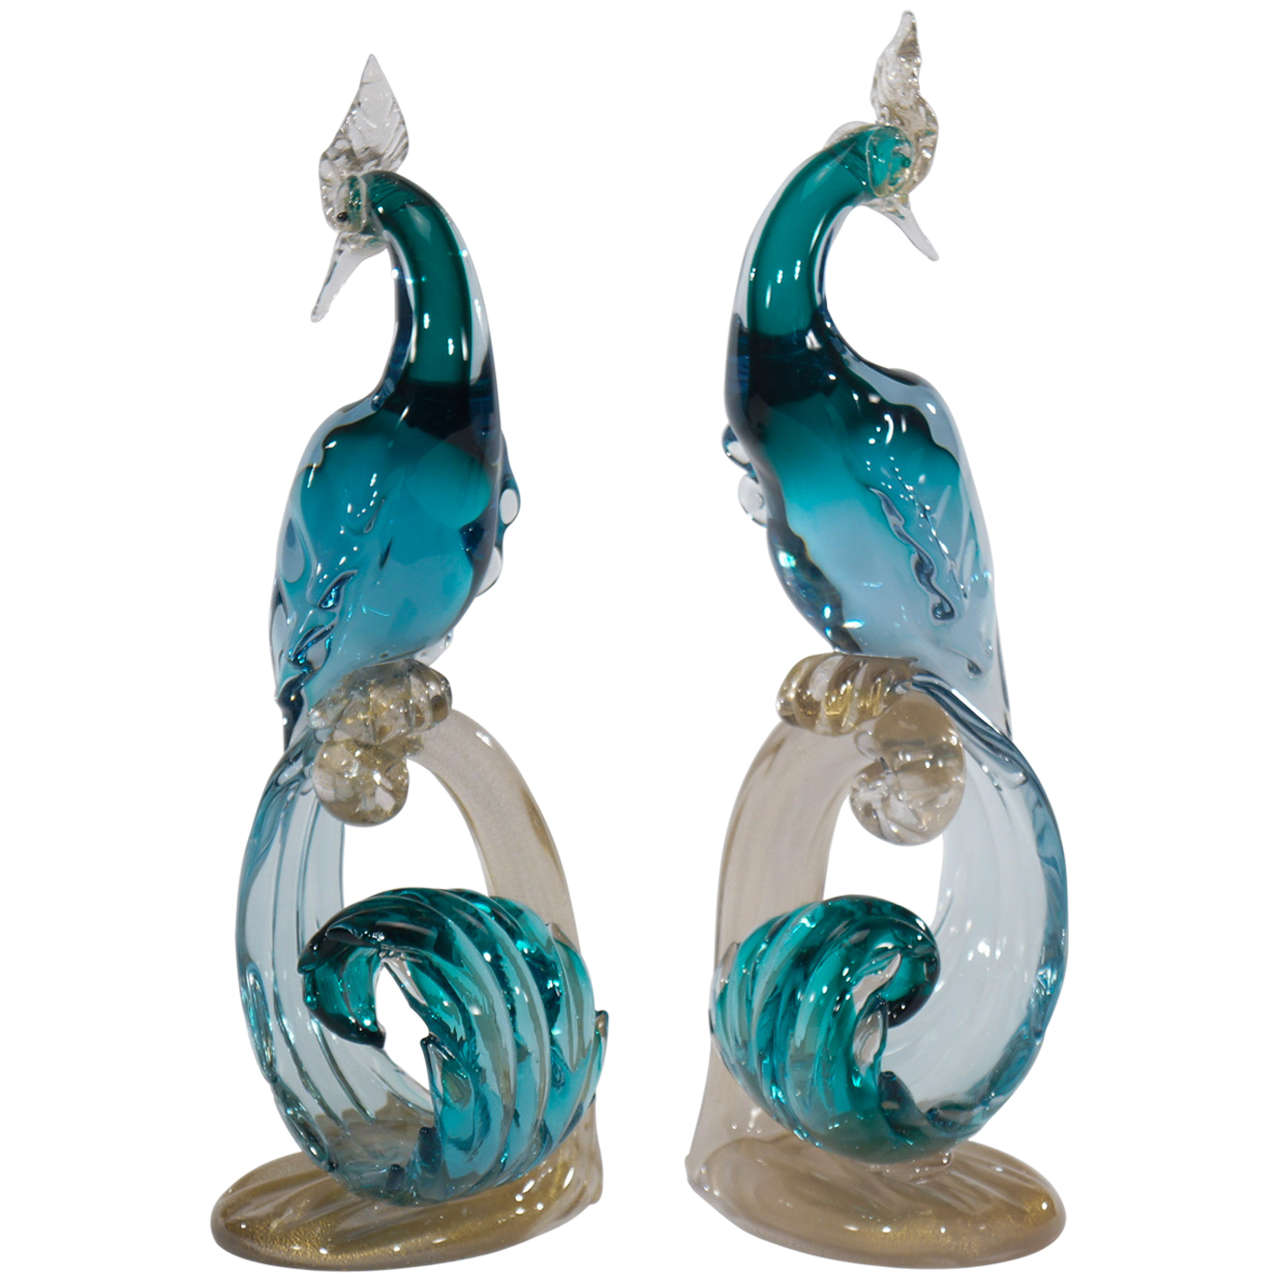 This is a matched pair of hand blown, tall and fanciful Murano 